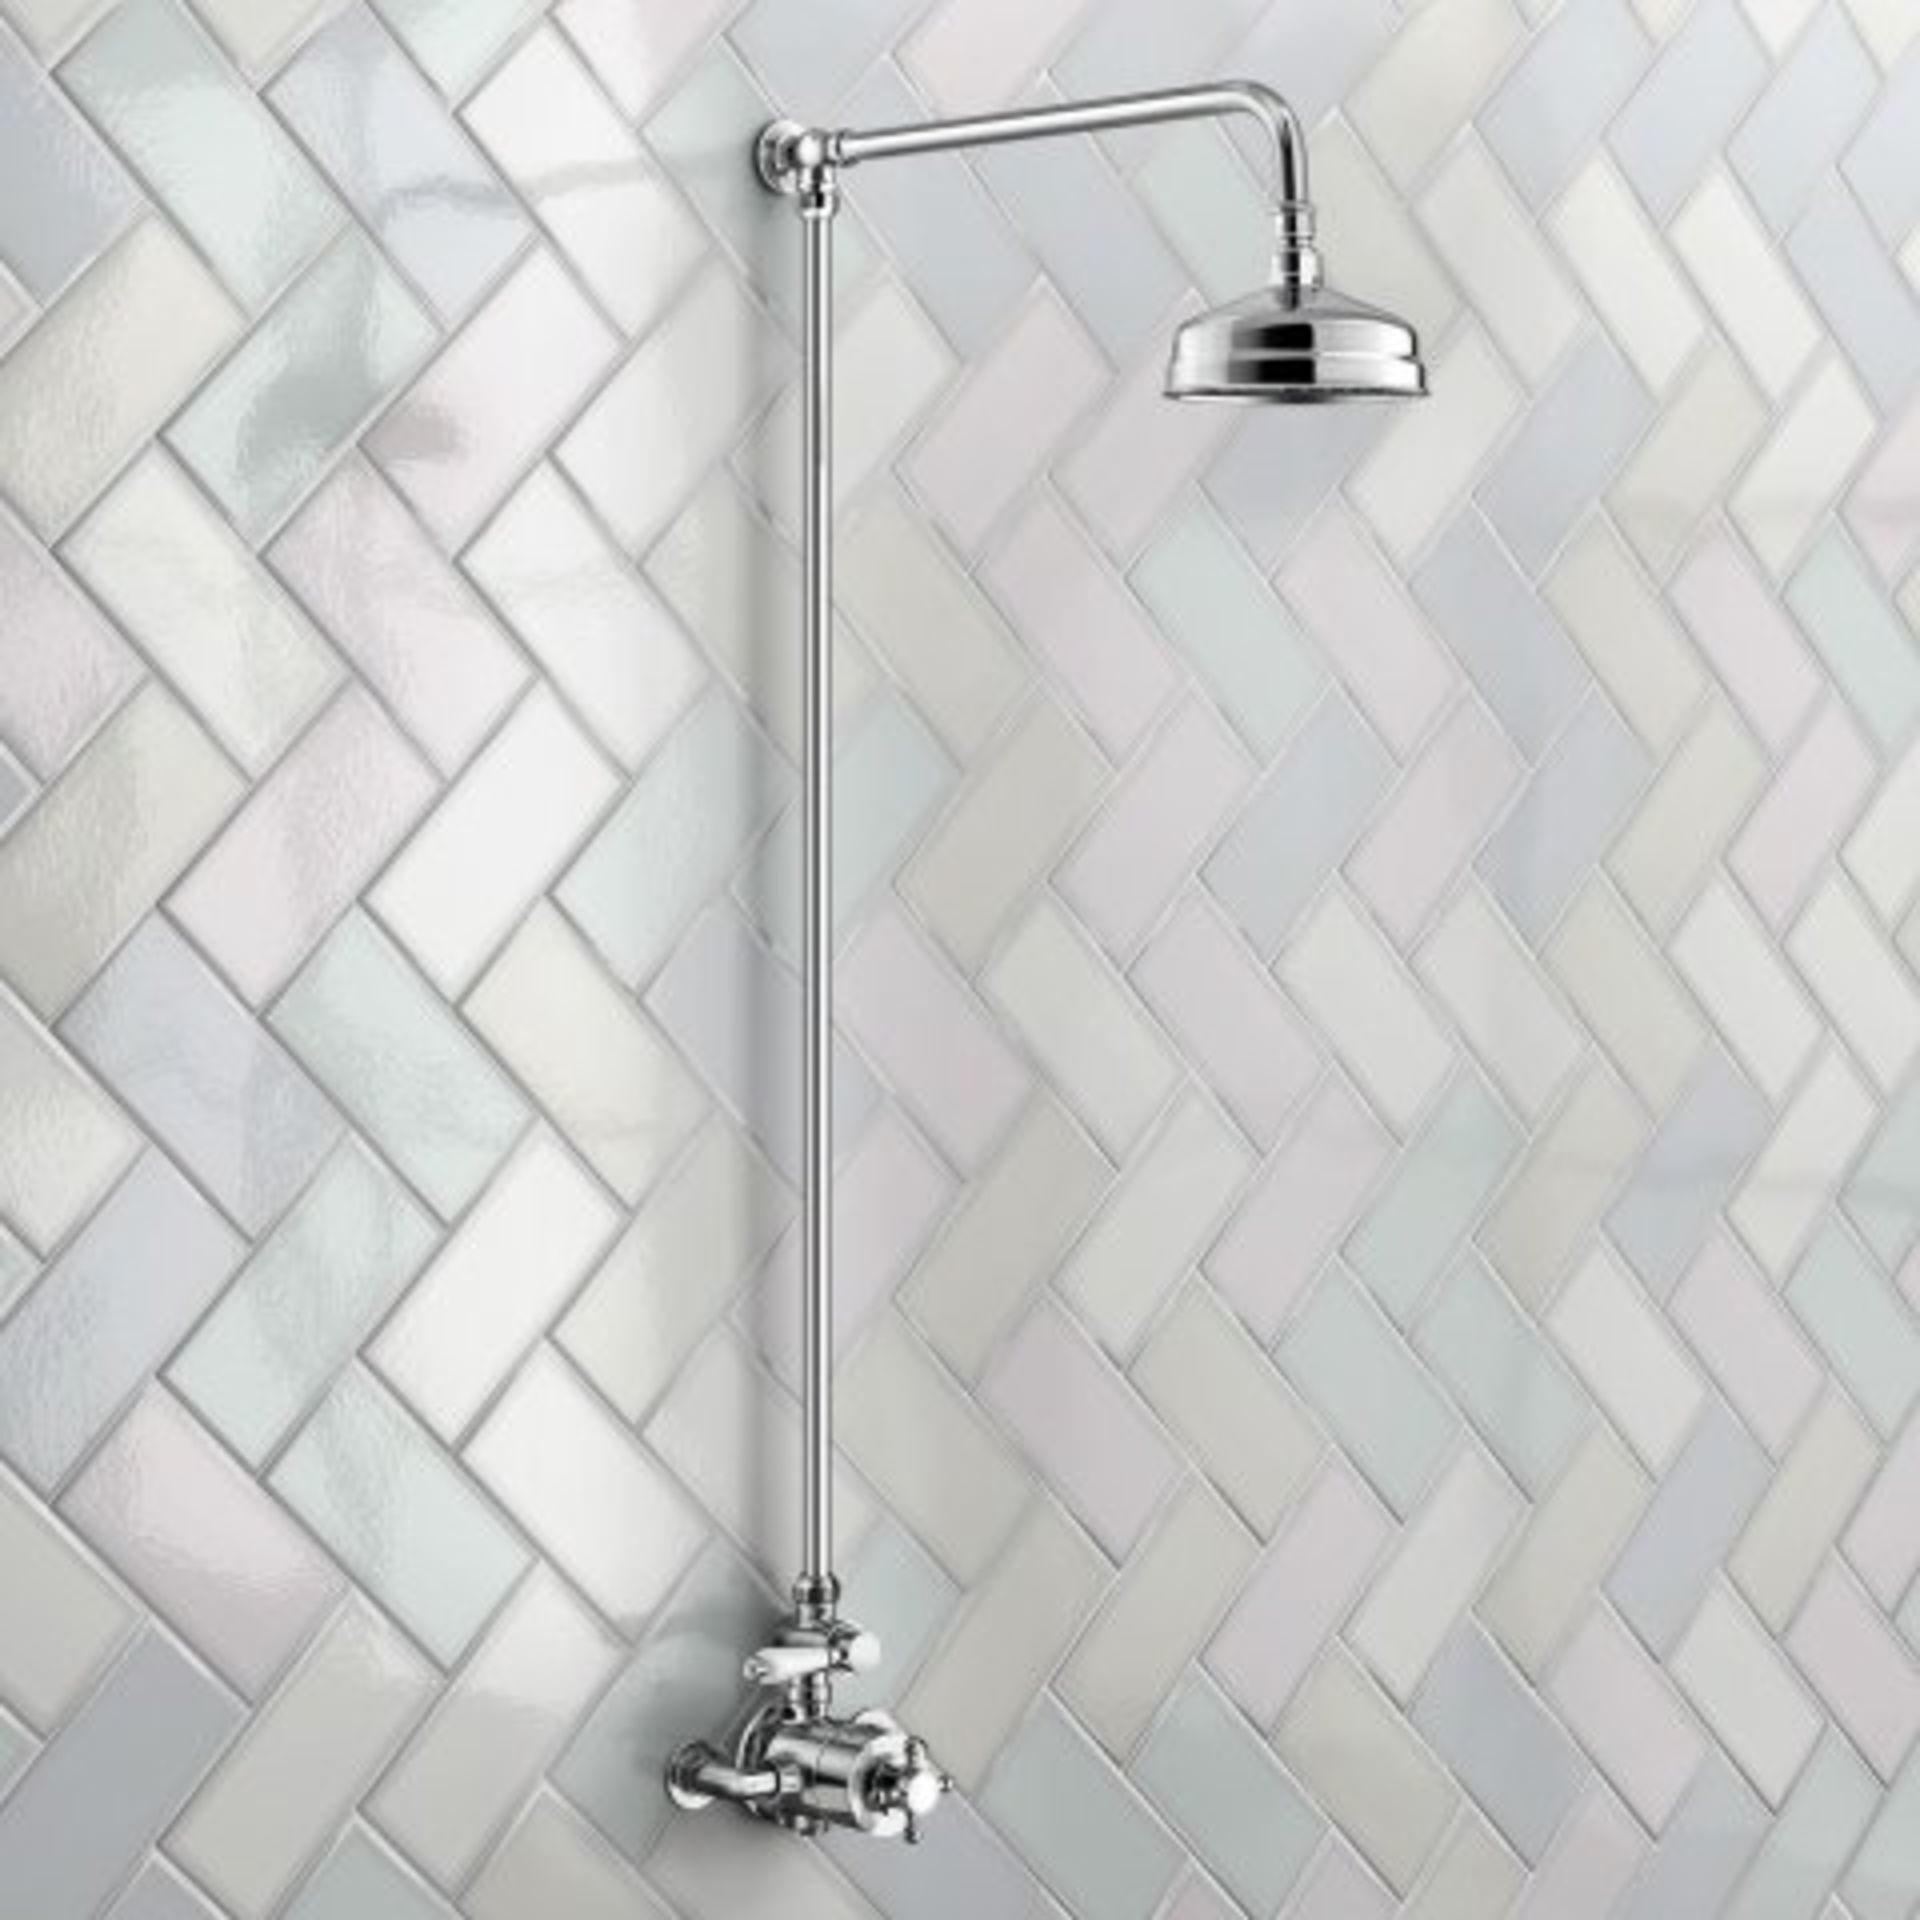 (I22) 150mm Head Traditional Thermostatic Exposed Shower Kit. RRP £399.99. We take our cues from the - Image 2 of 5